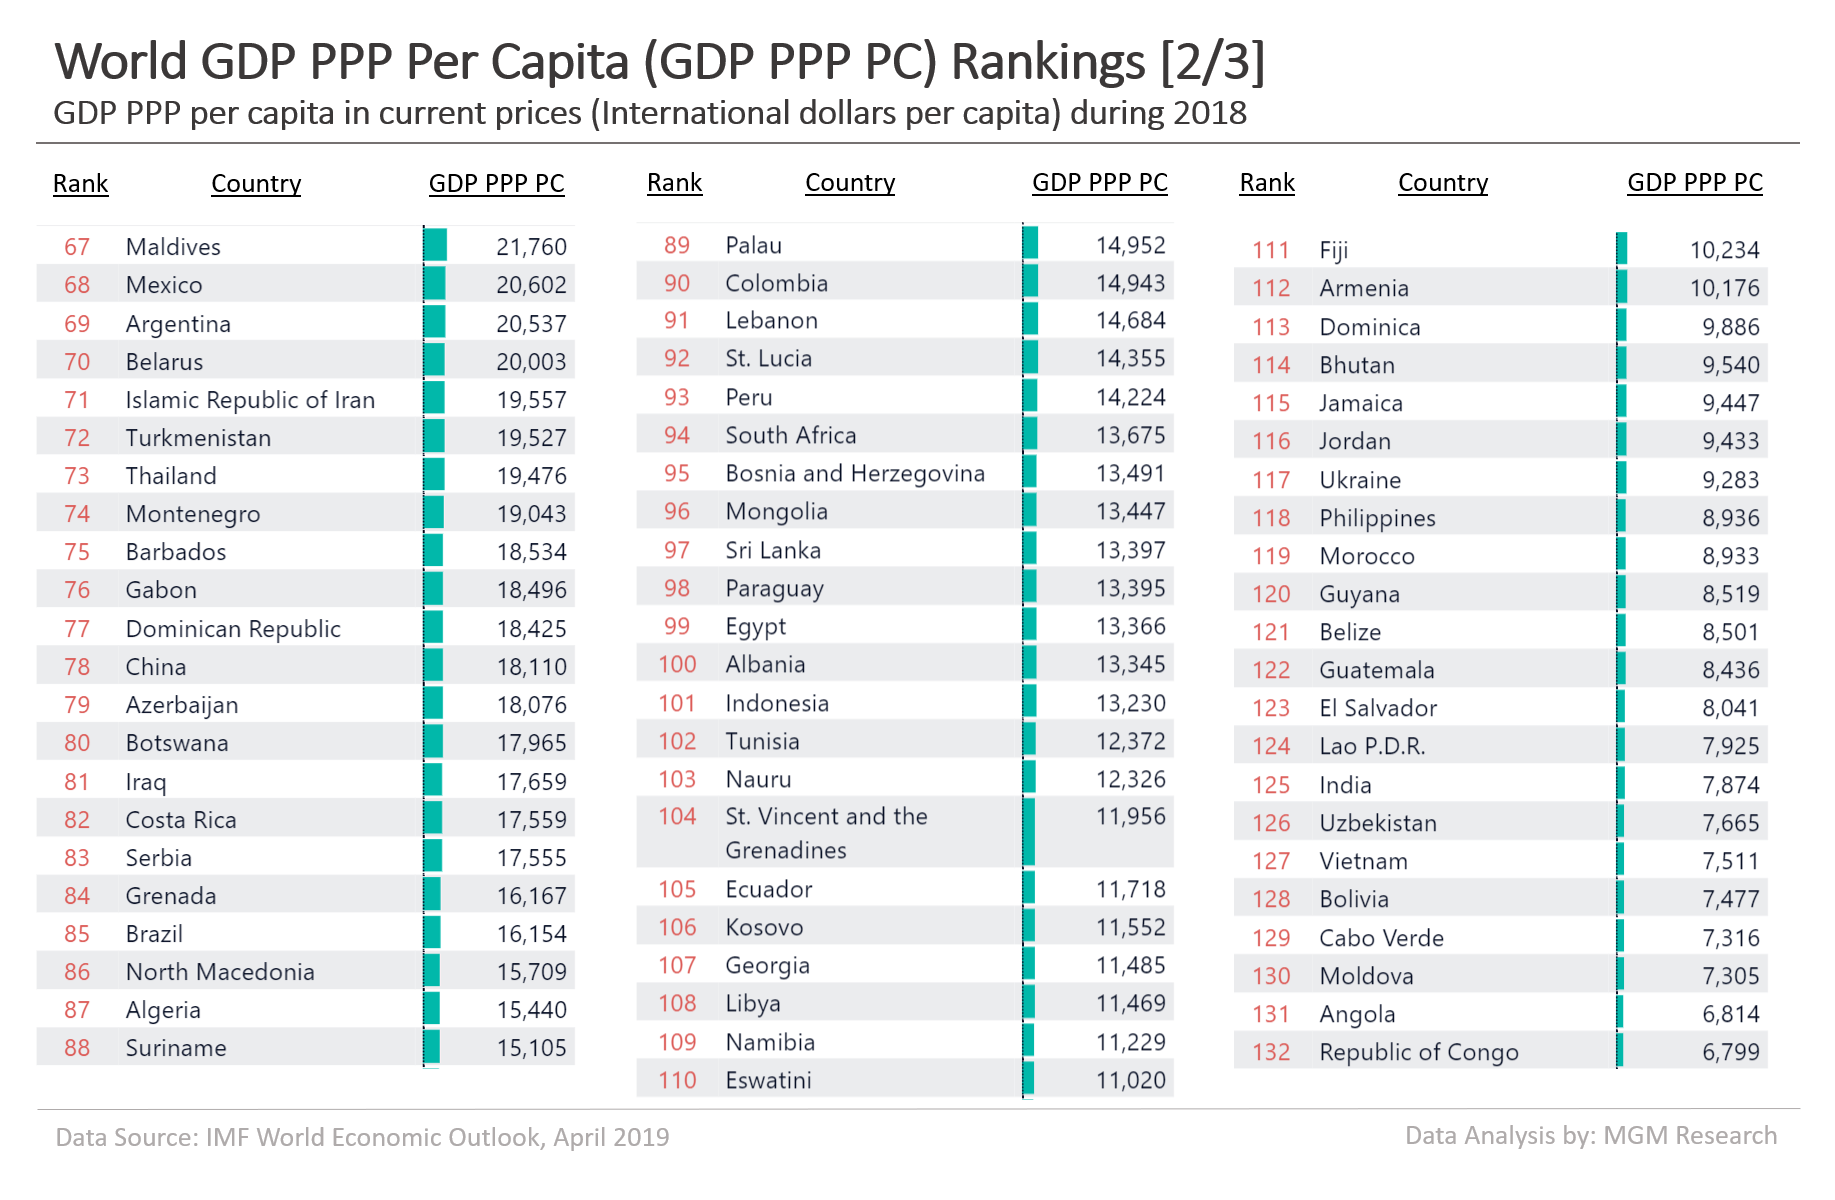 World GDP PPP PC Rankings 2 of 3